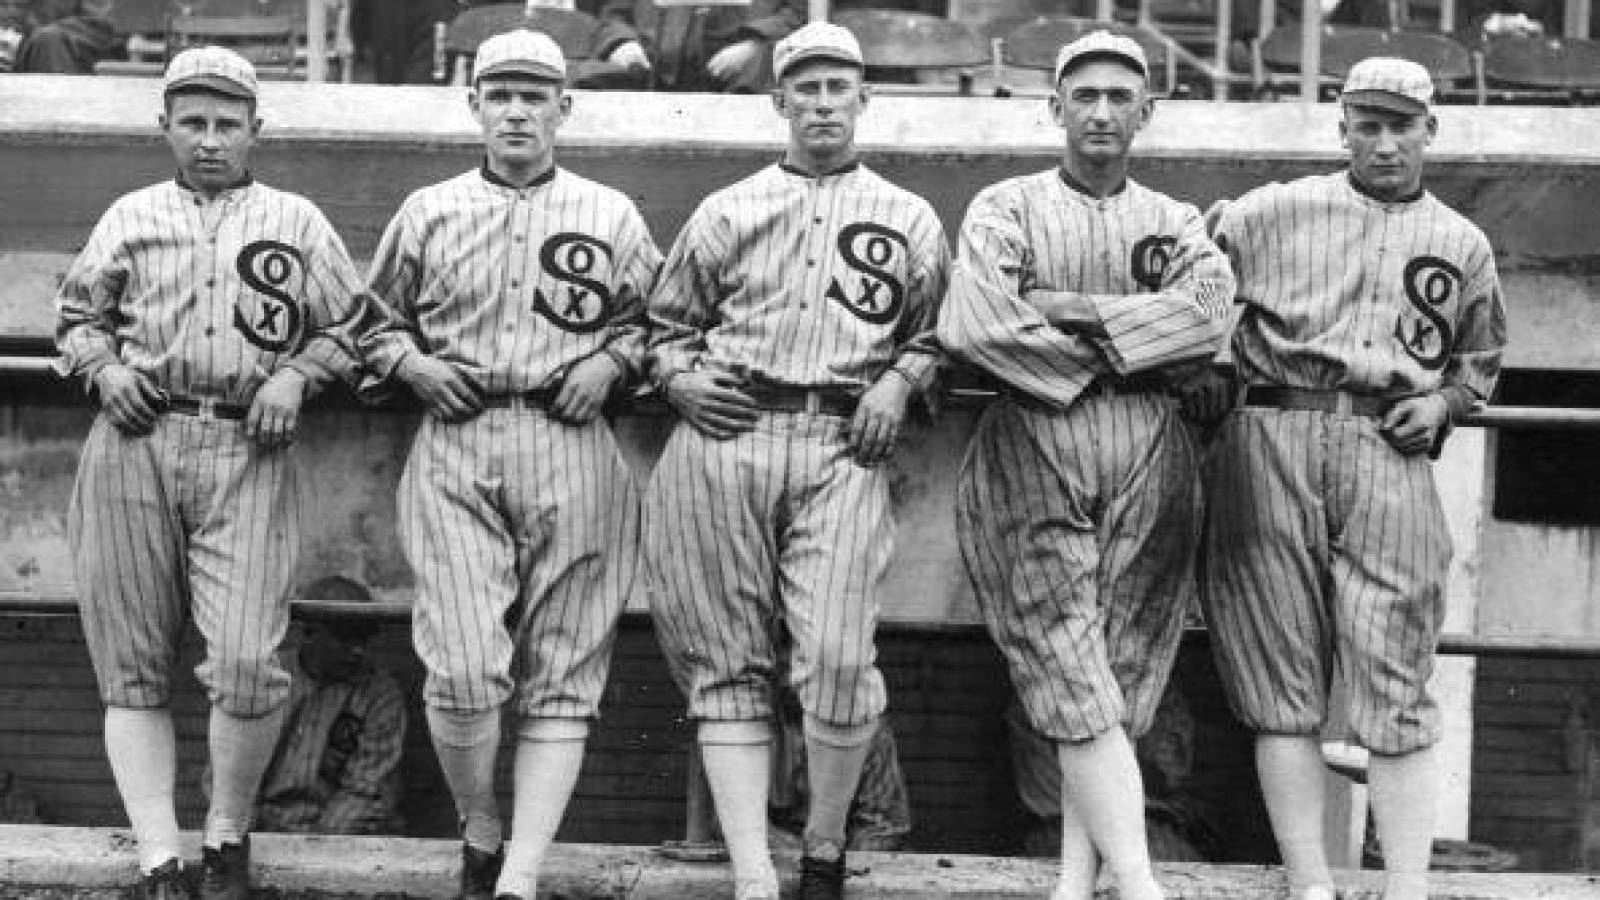 Chicago Black Sox: The Scandal That Changed Baseball Forever